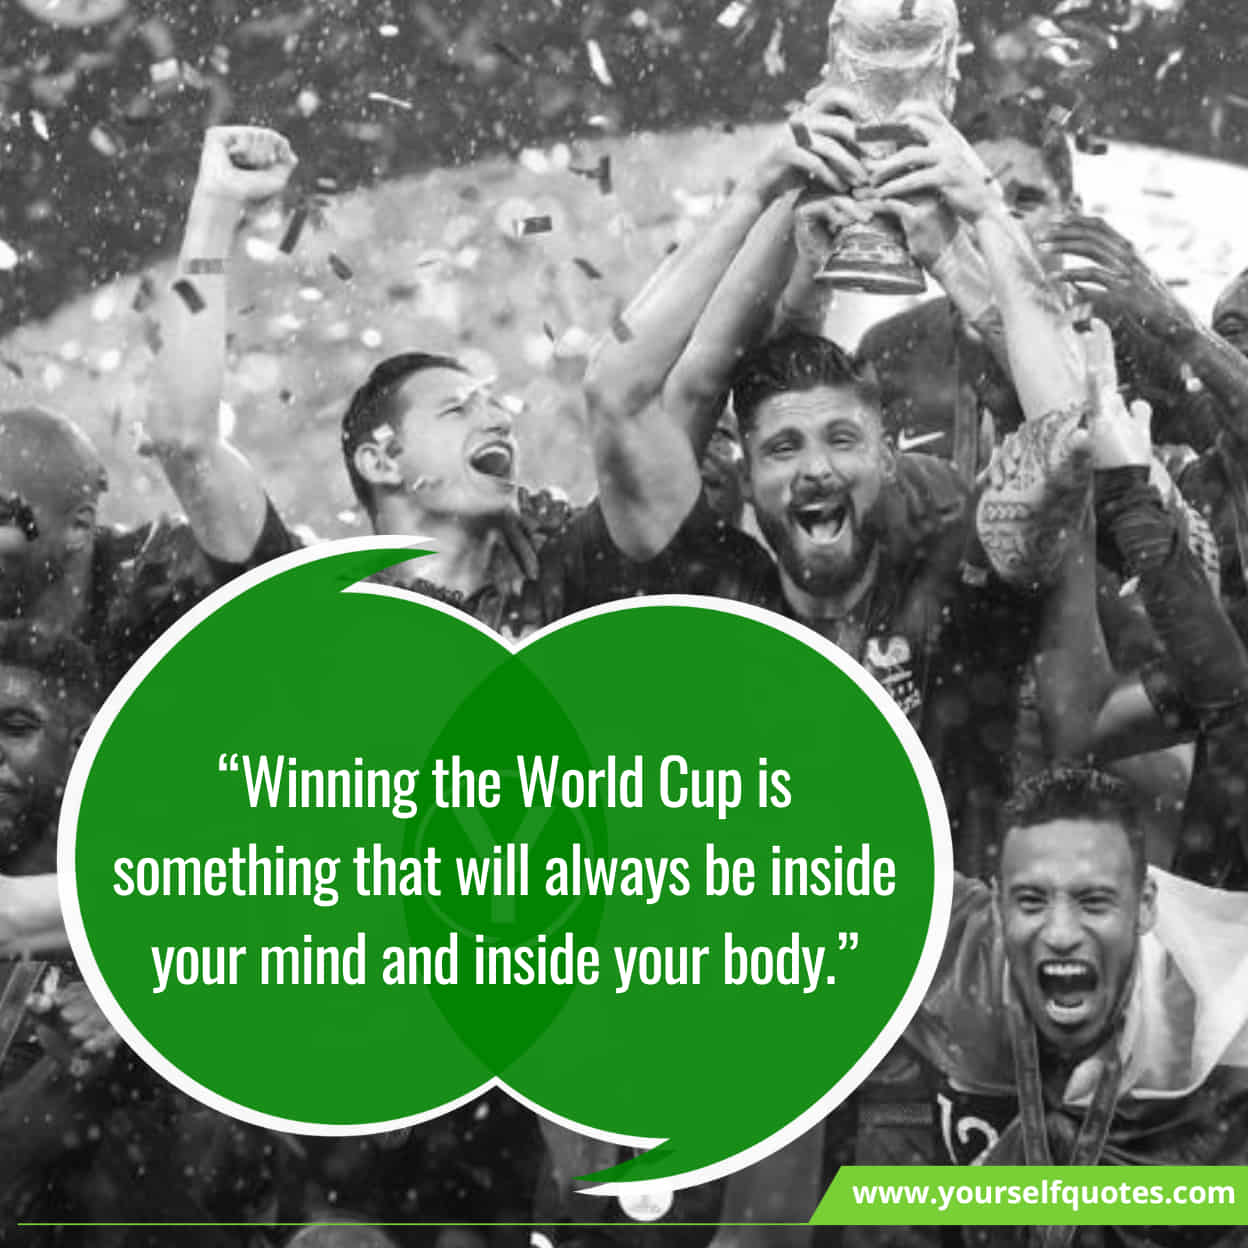 FIFA World Cup Quotes About Success